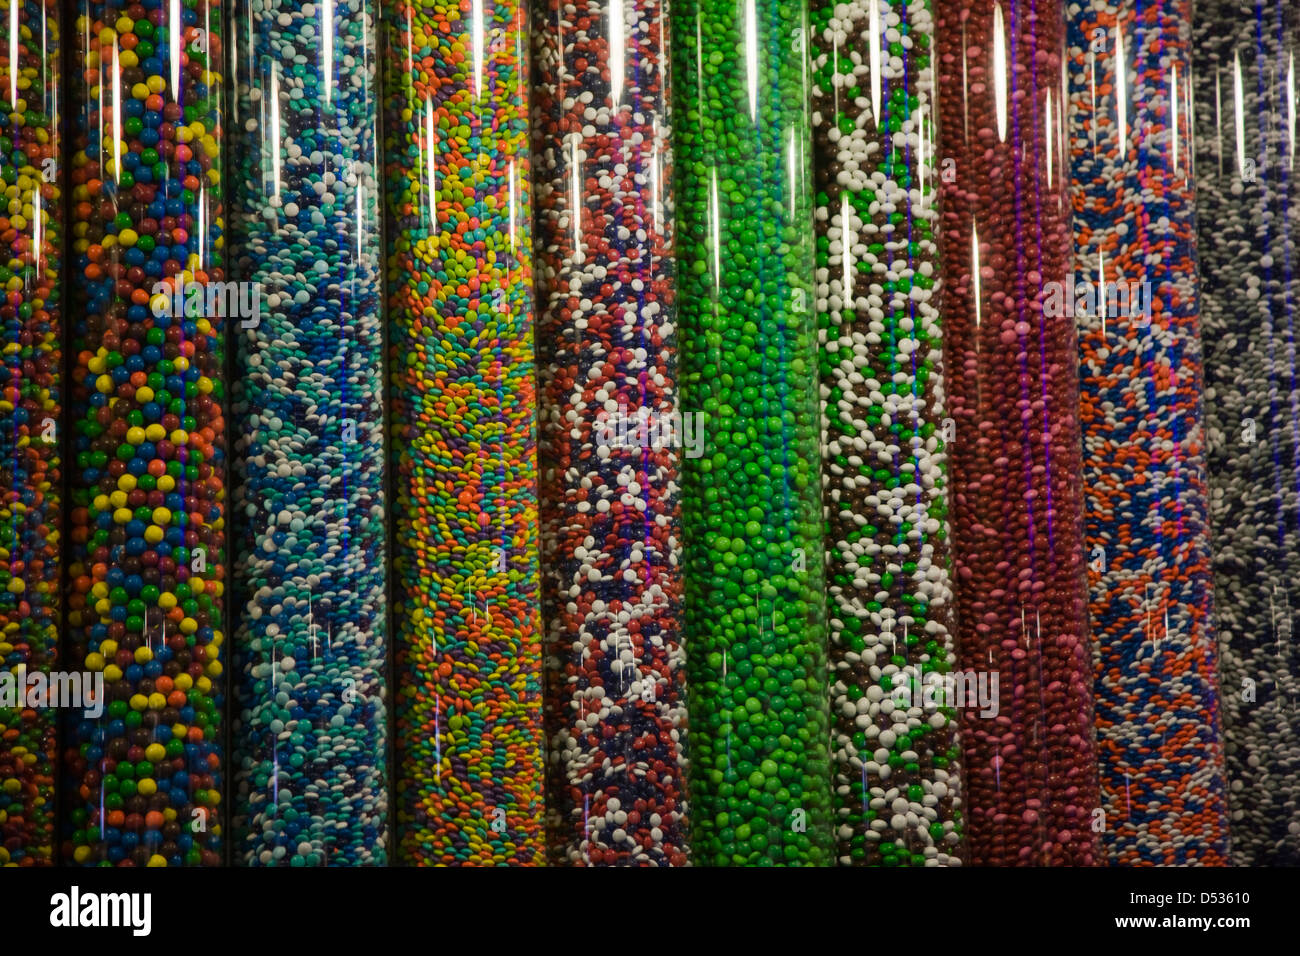 M&Ms sweets in plastic dispenser tubes in the M&M shop in New York Stock Photo